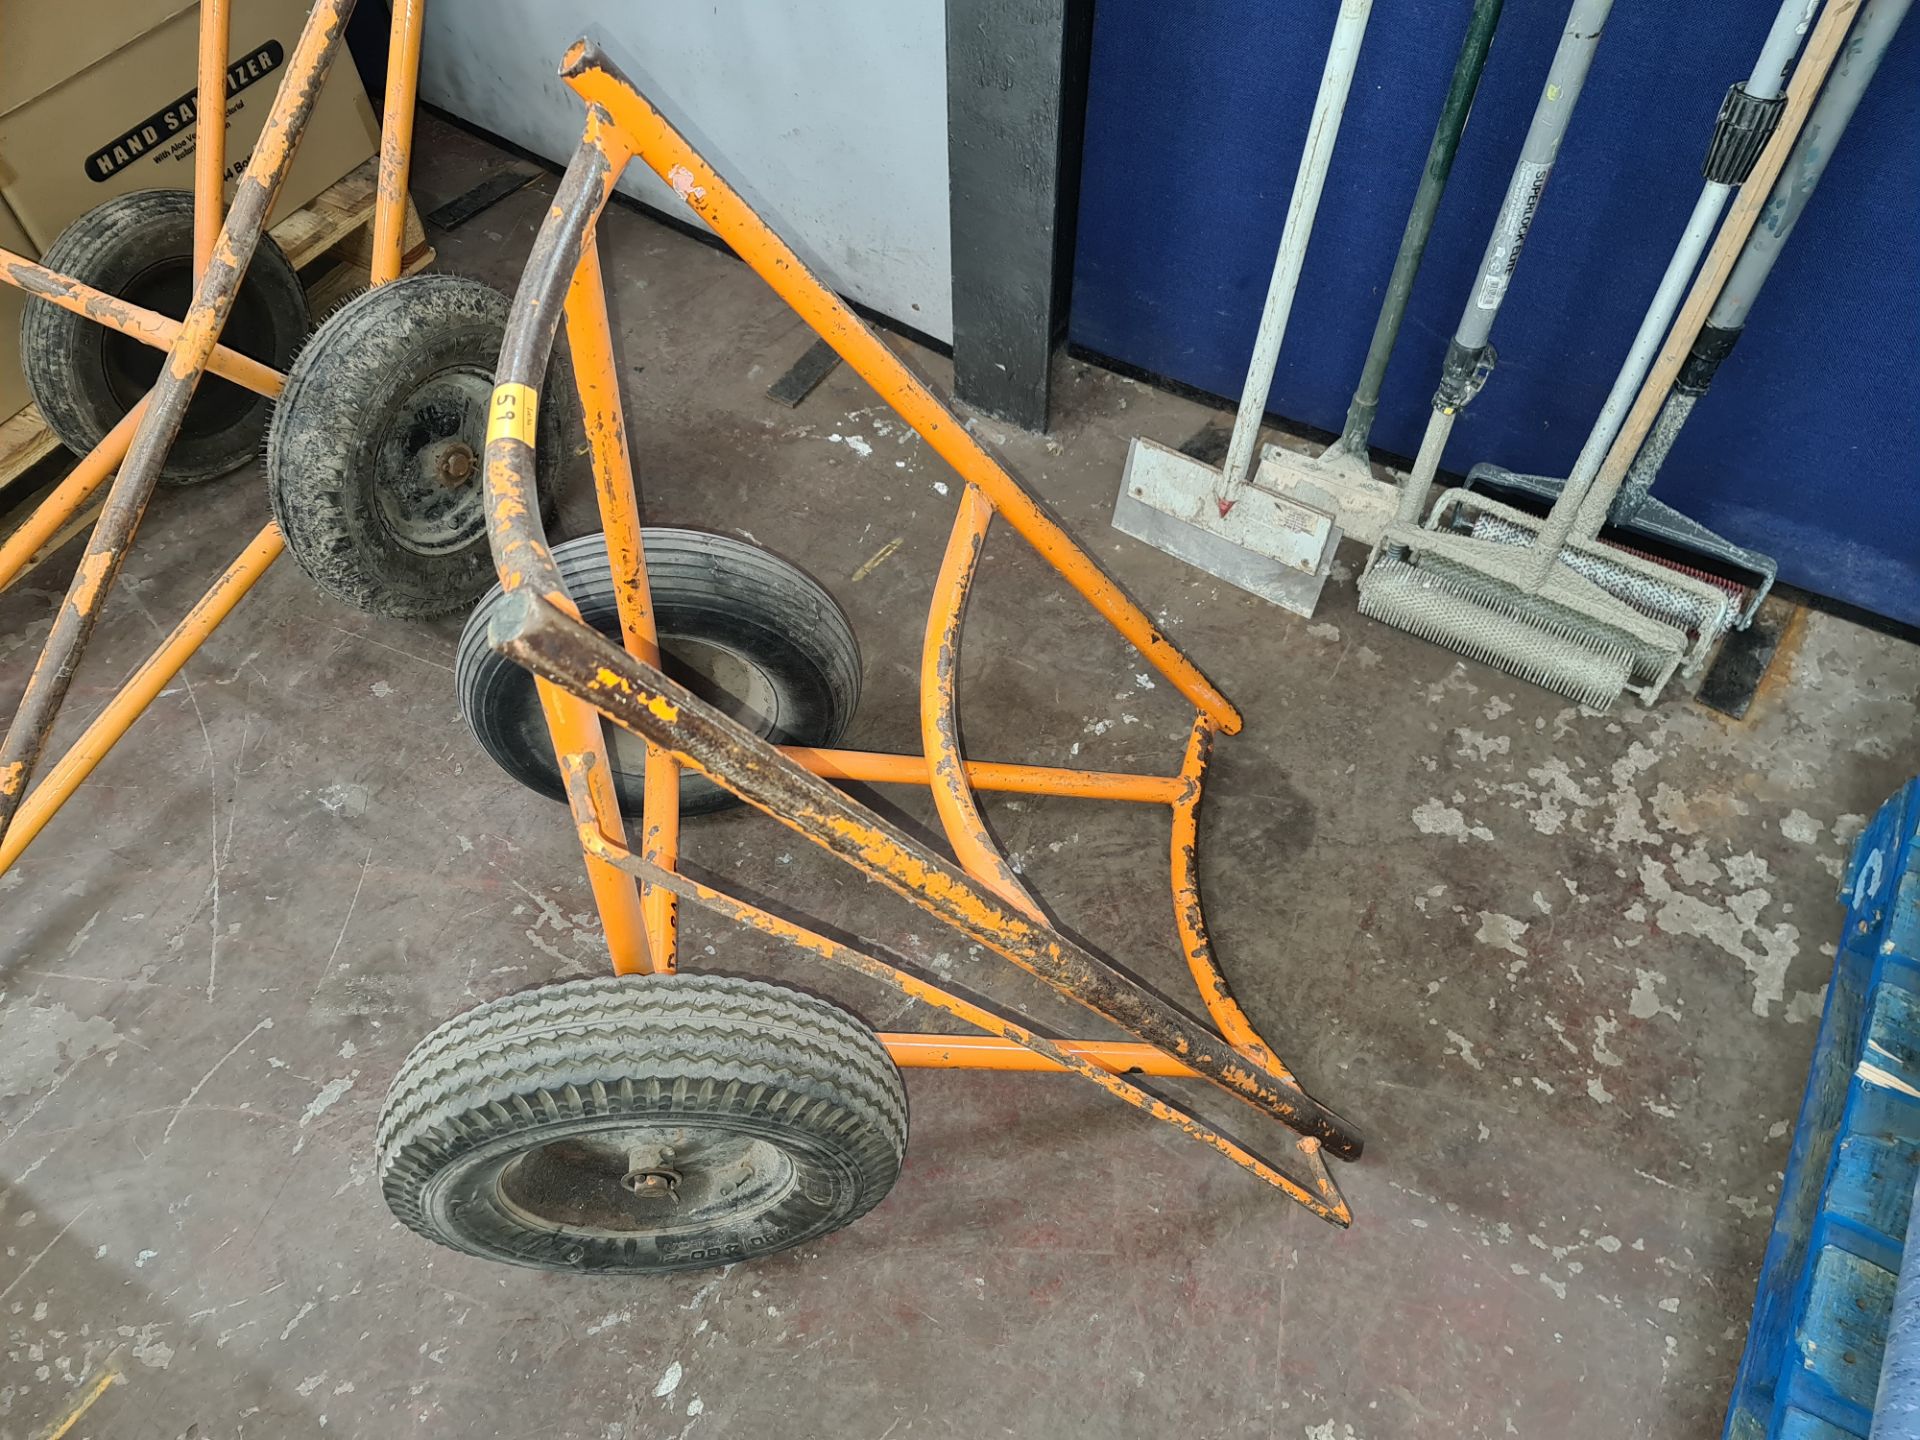 Trolley for use with handling rolls of carpet, vinyl flooring, artificial turf & similar